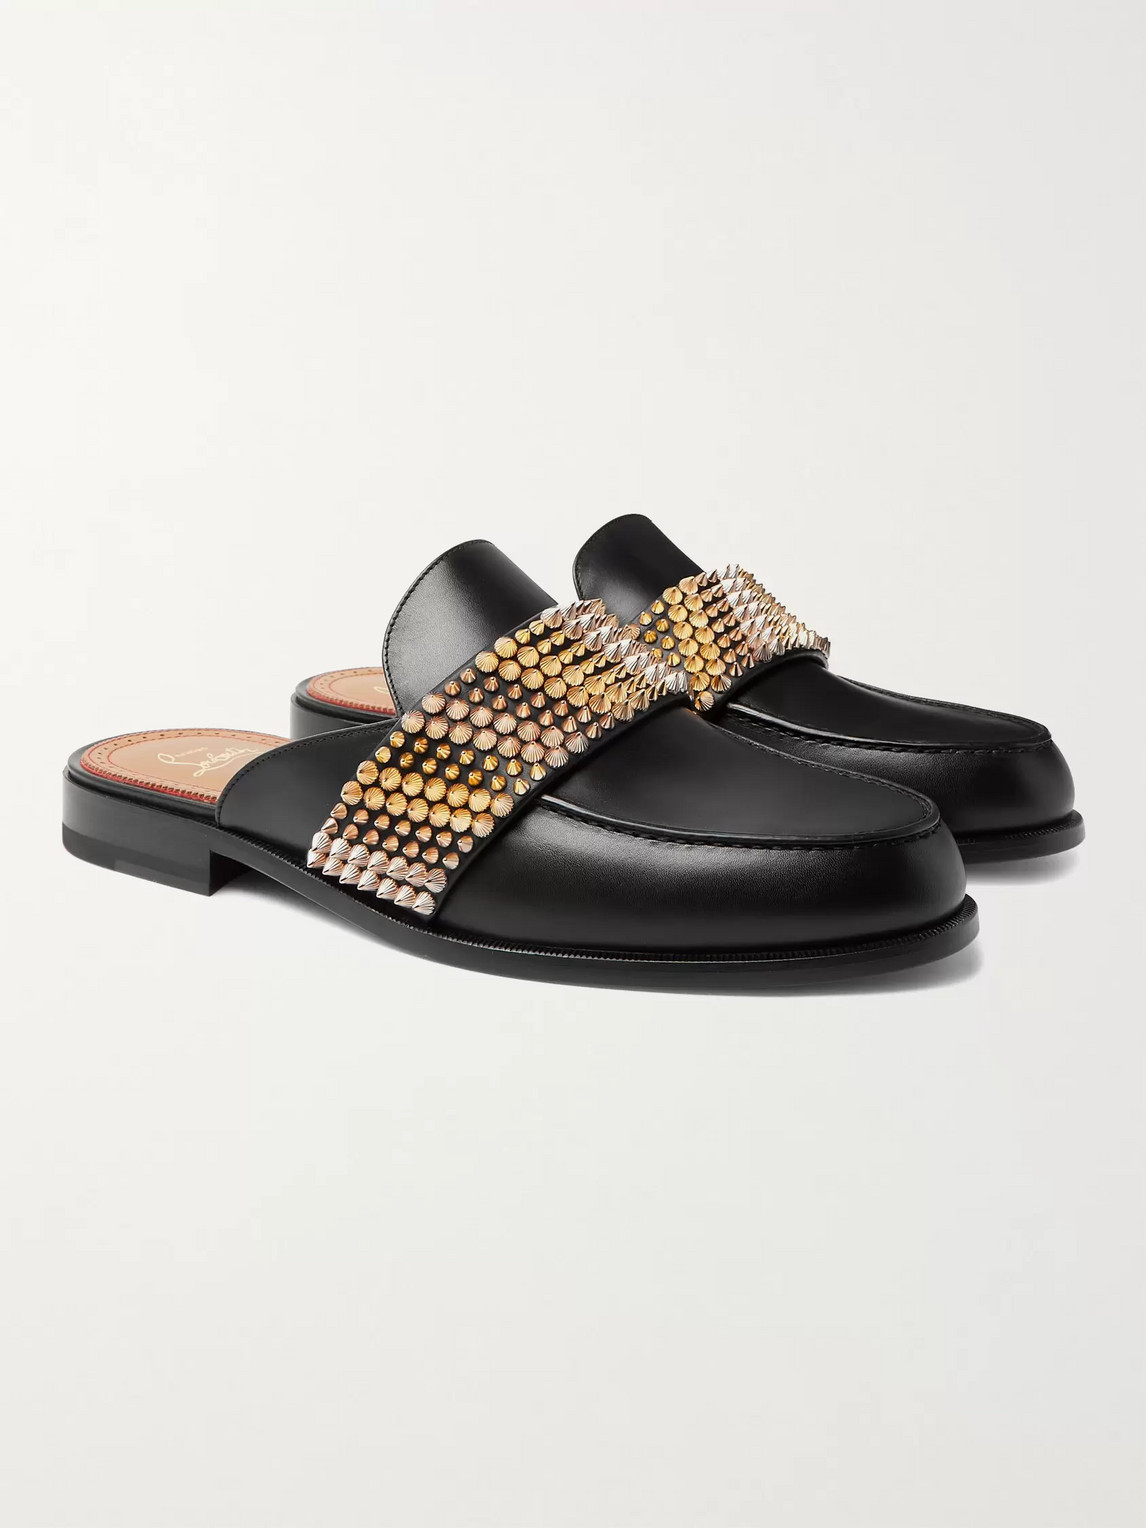 CHRISTIAN LOUBOUTIN STUDDED LEATHER BACKLESS LOAFERS